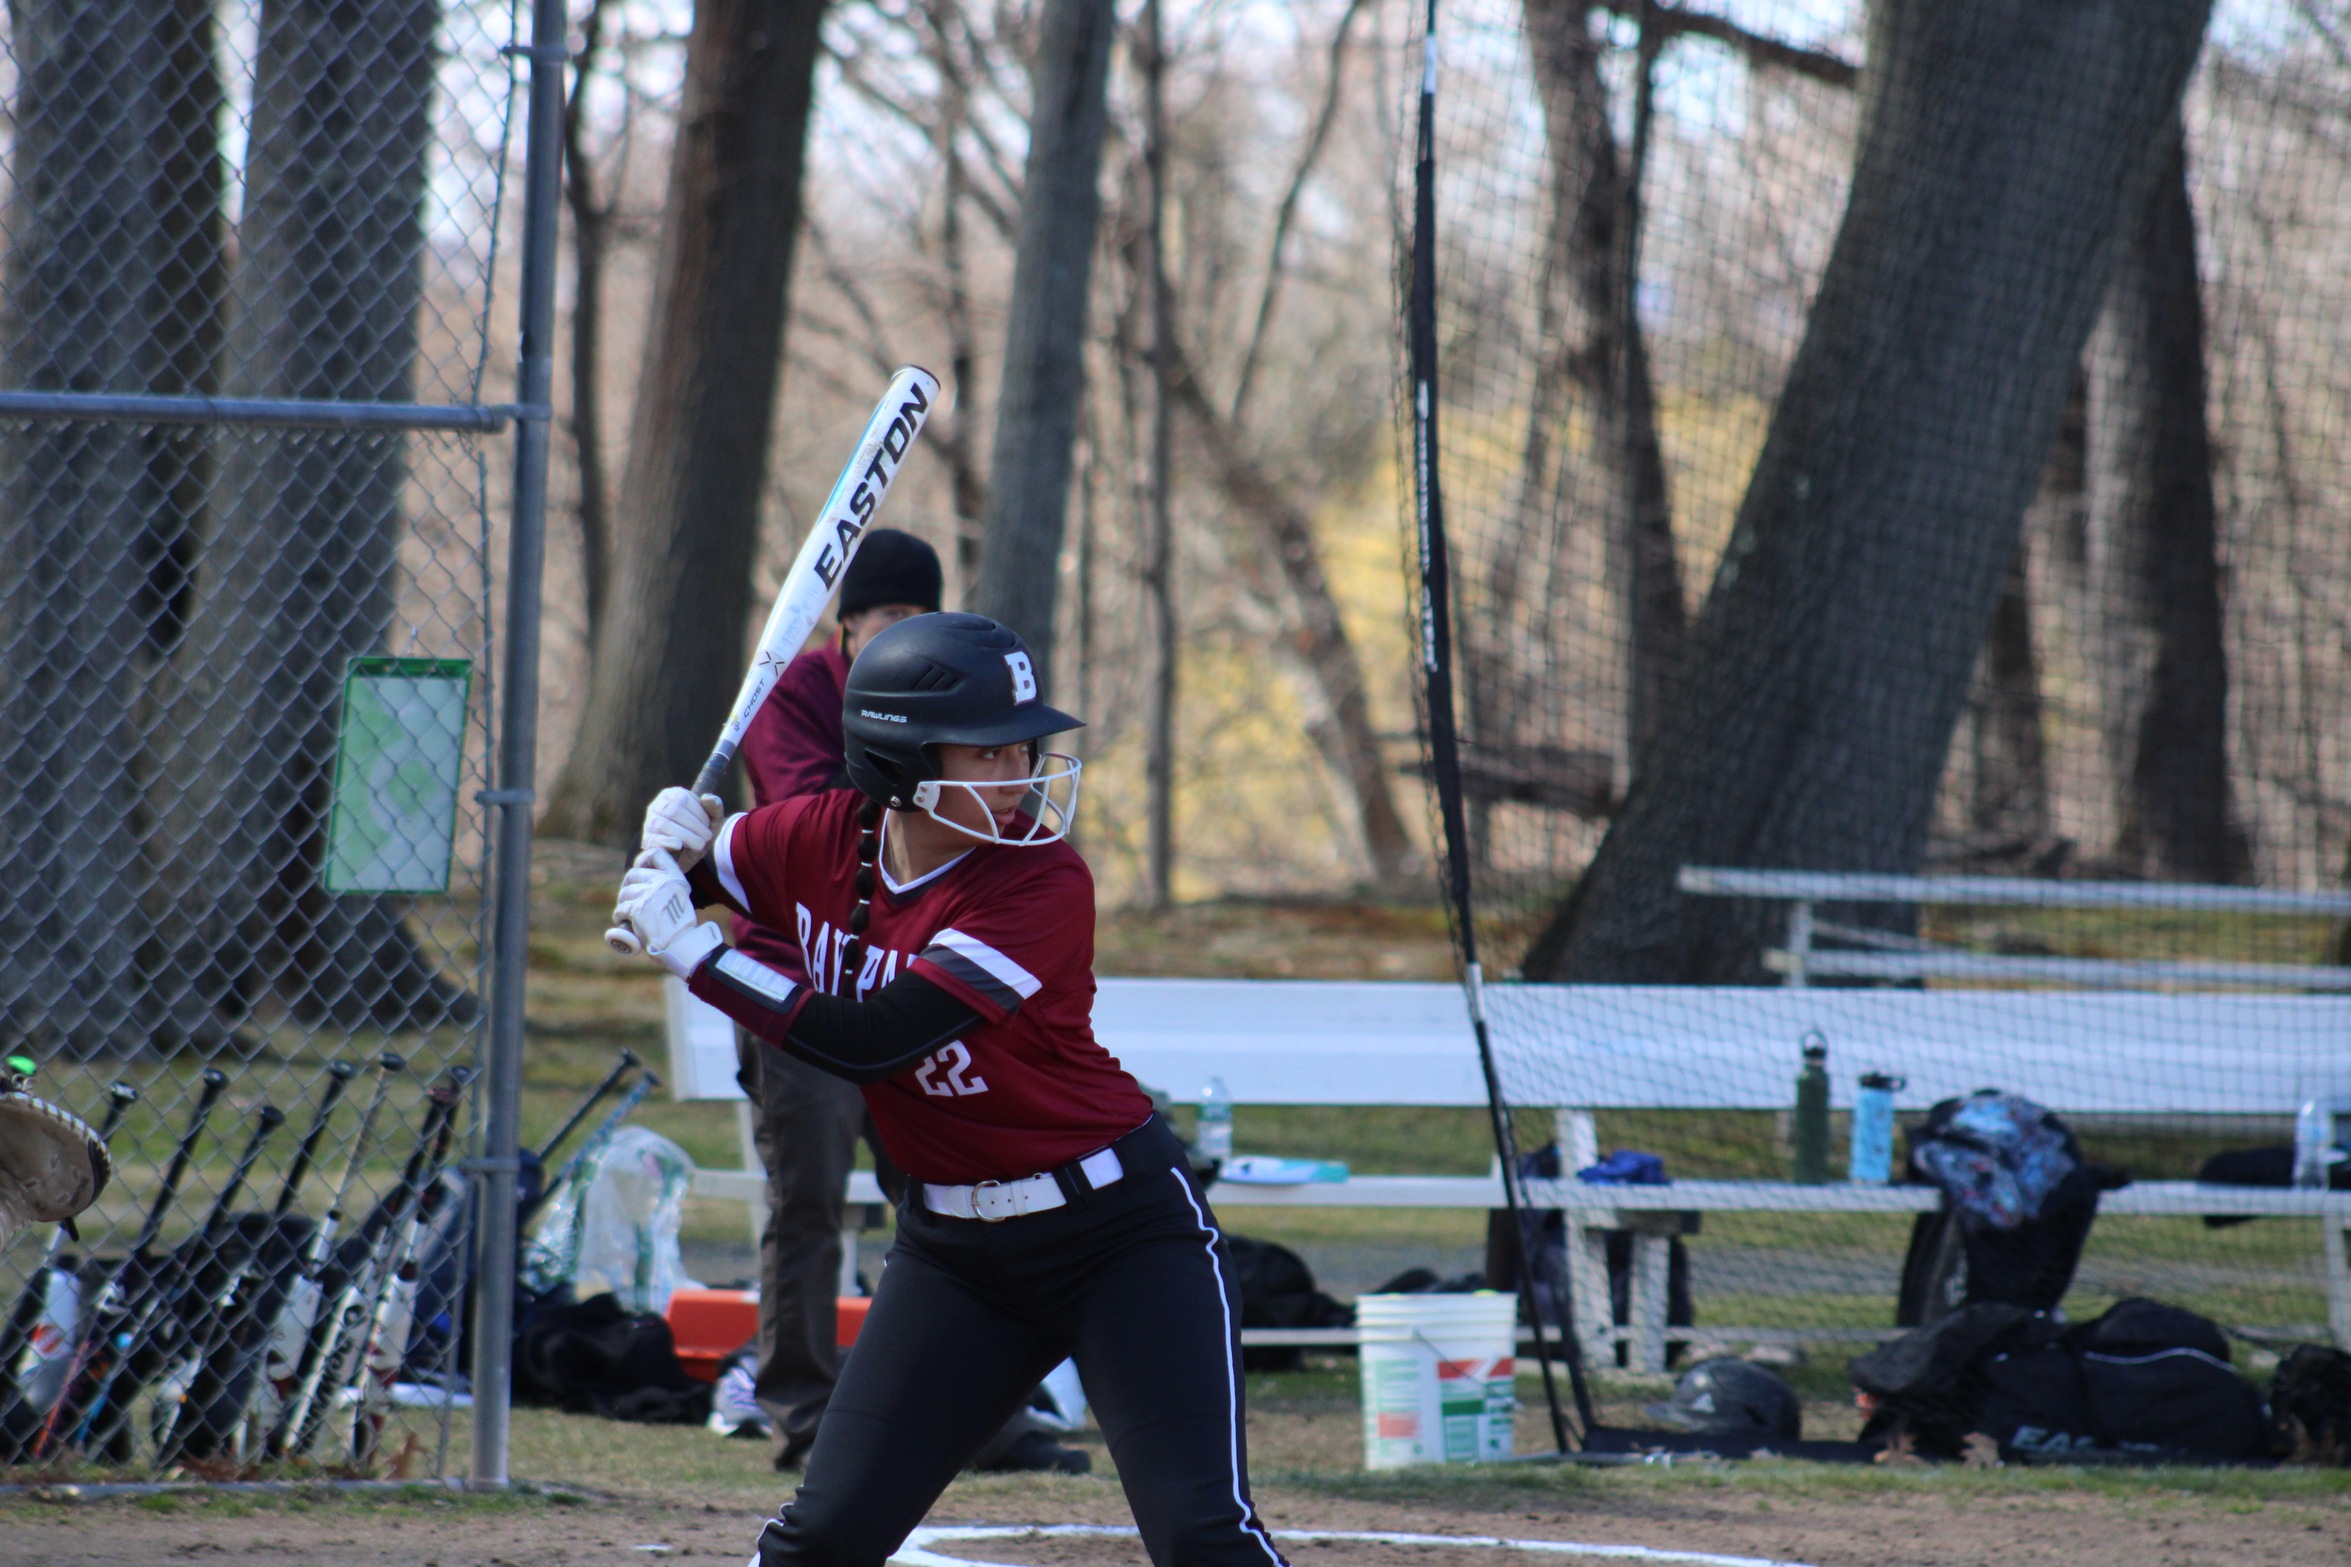 Wildcats Sweep Dean College in Softball Action